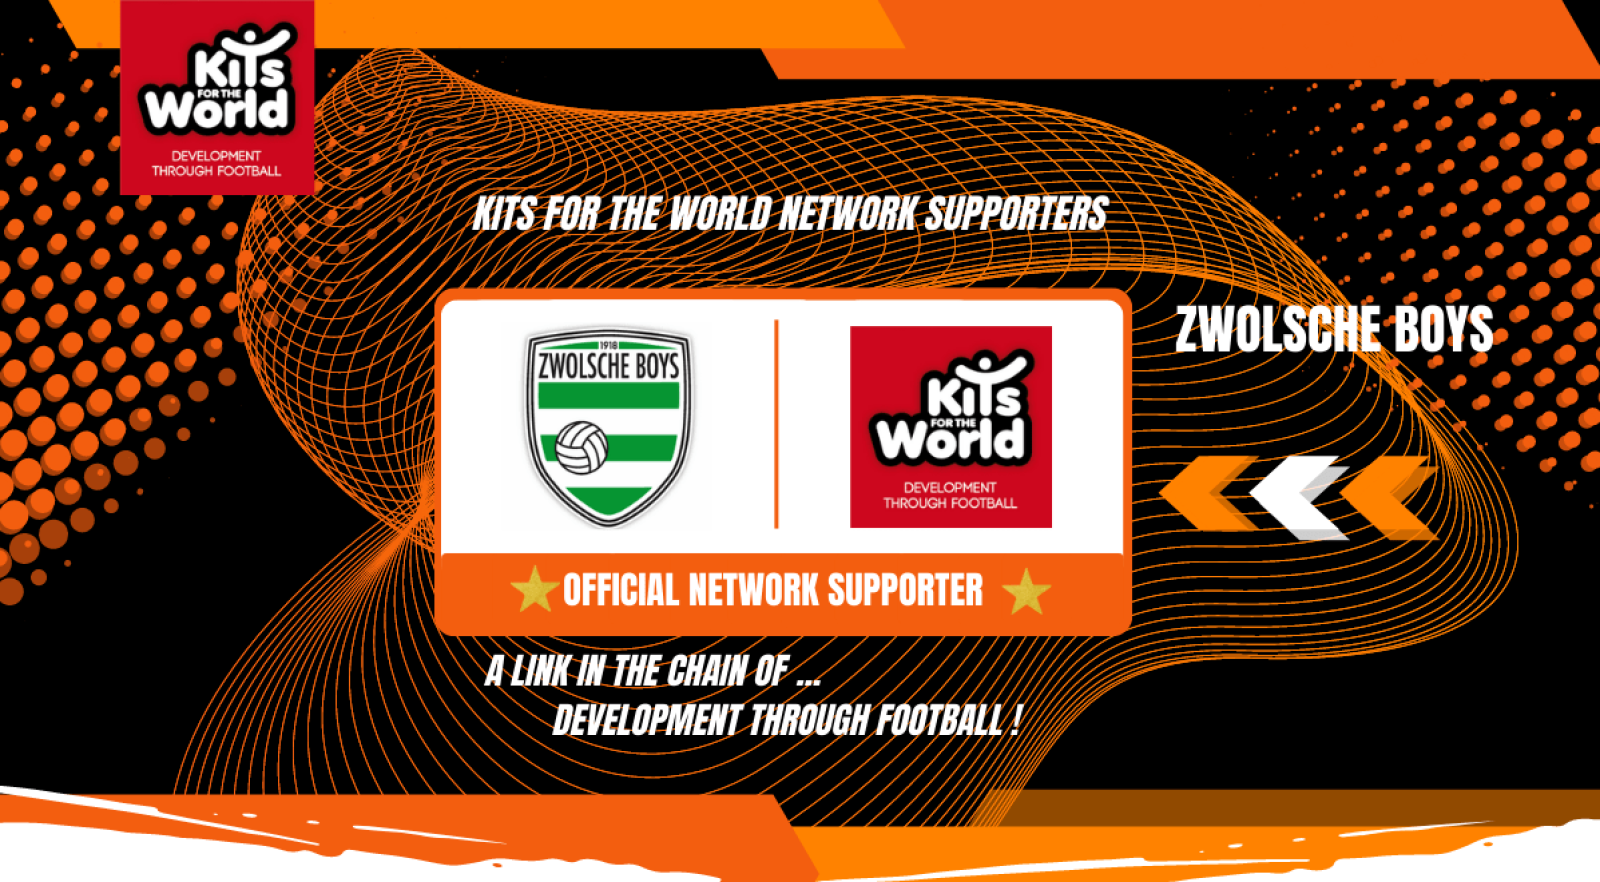 zwolsche boys_official NETWORK SUPPORTER _Kits for the World